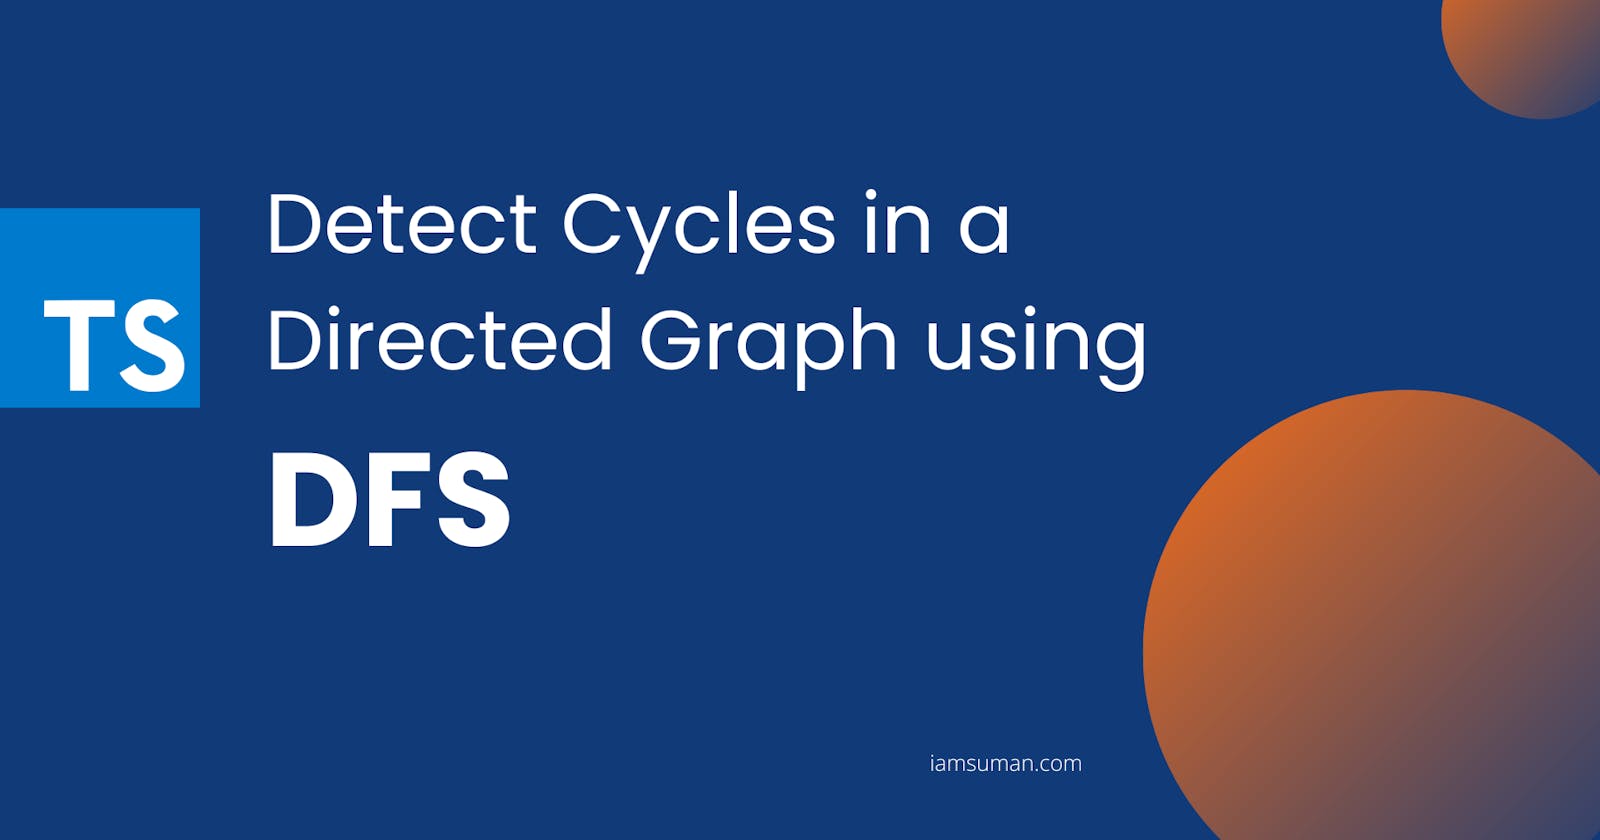 Detect Cycles in a Directed Graph using DFS